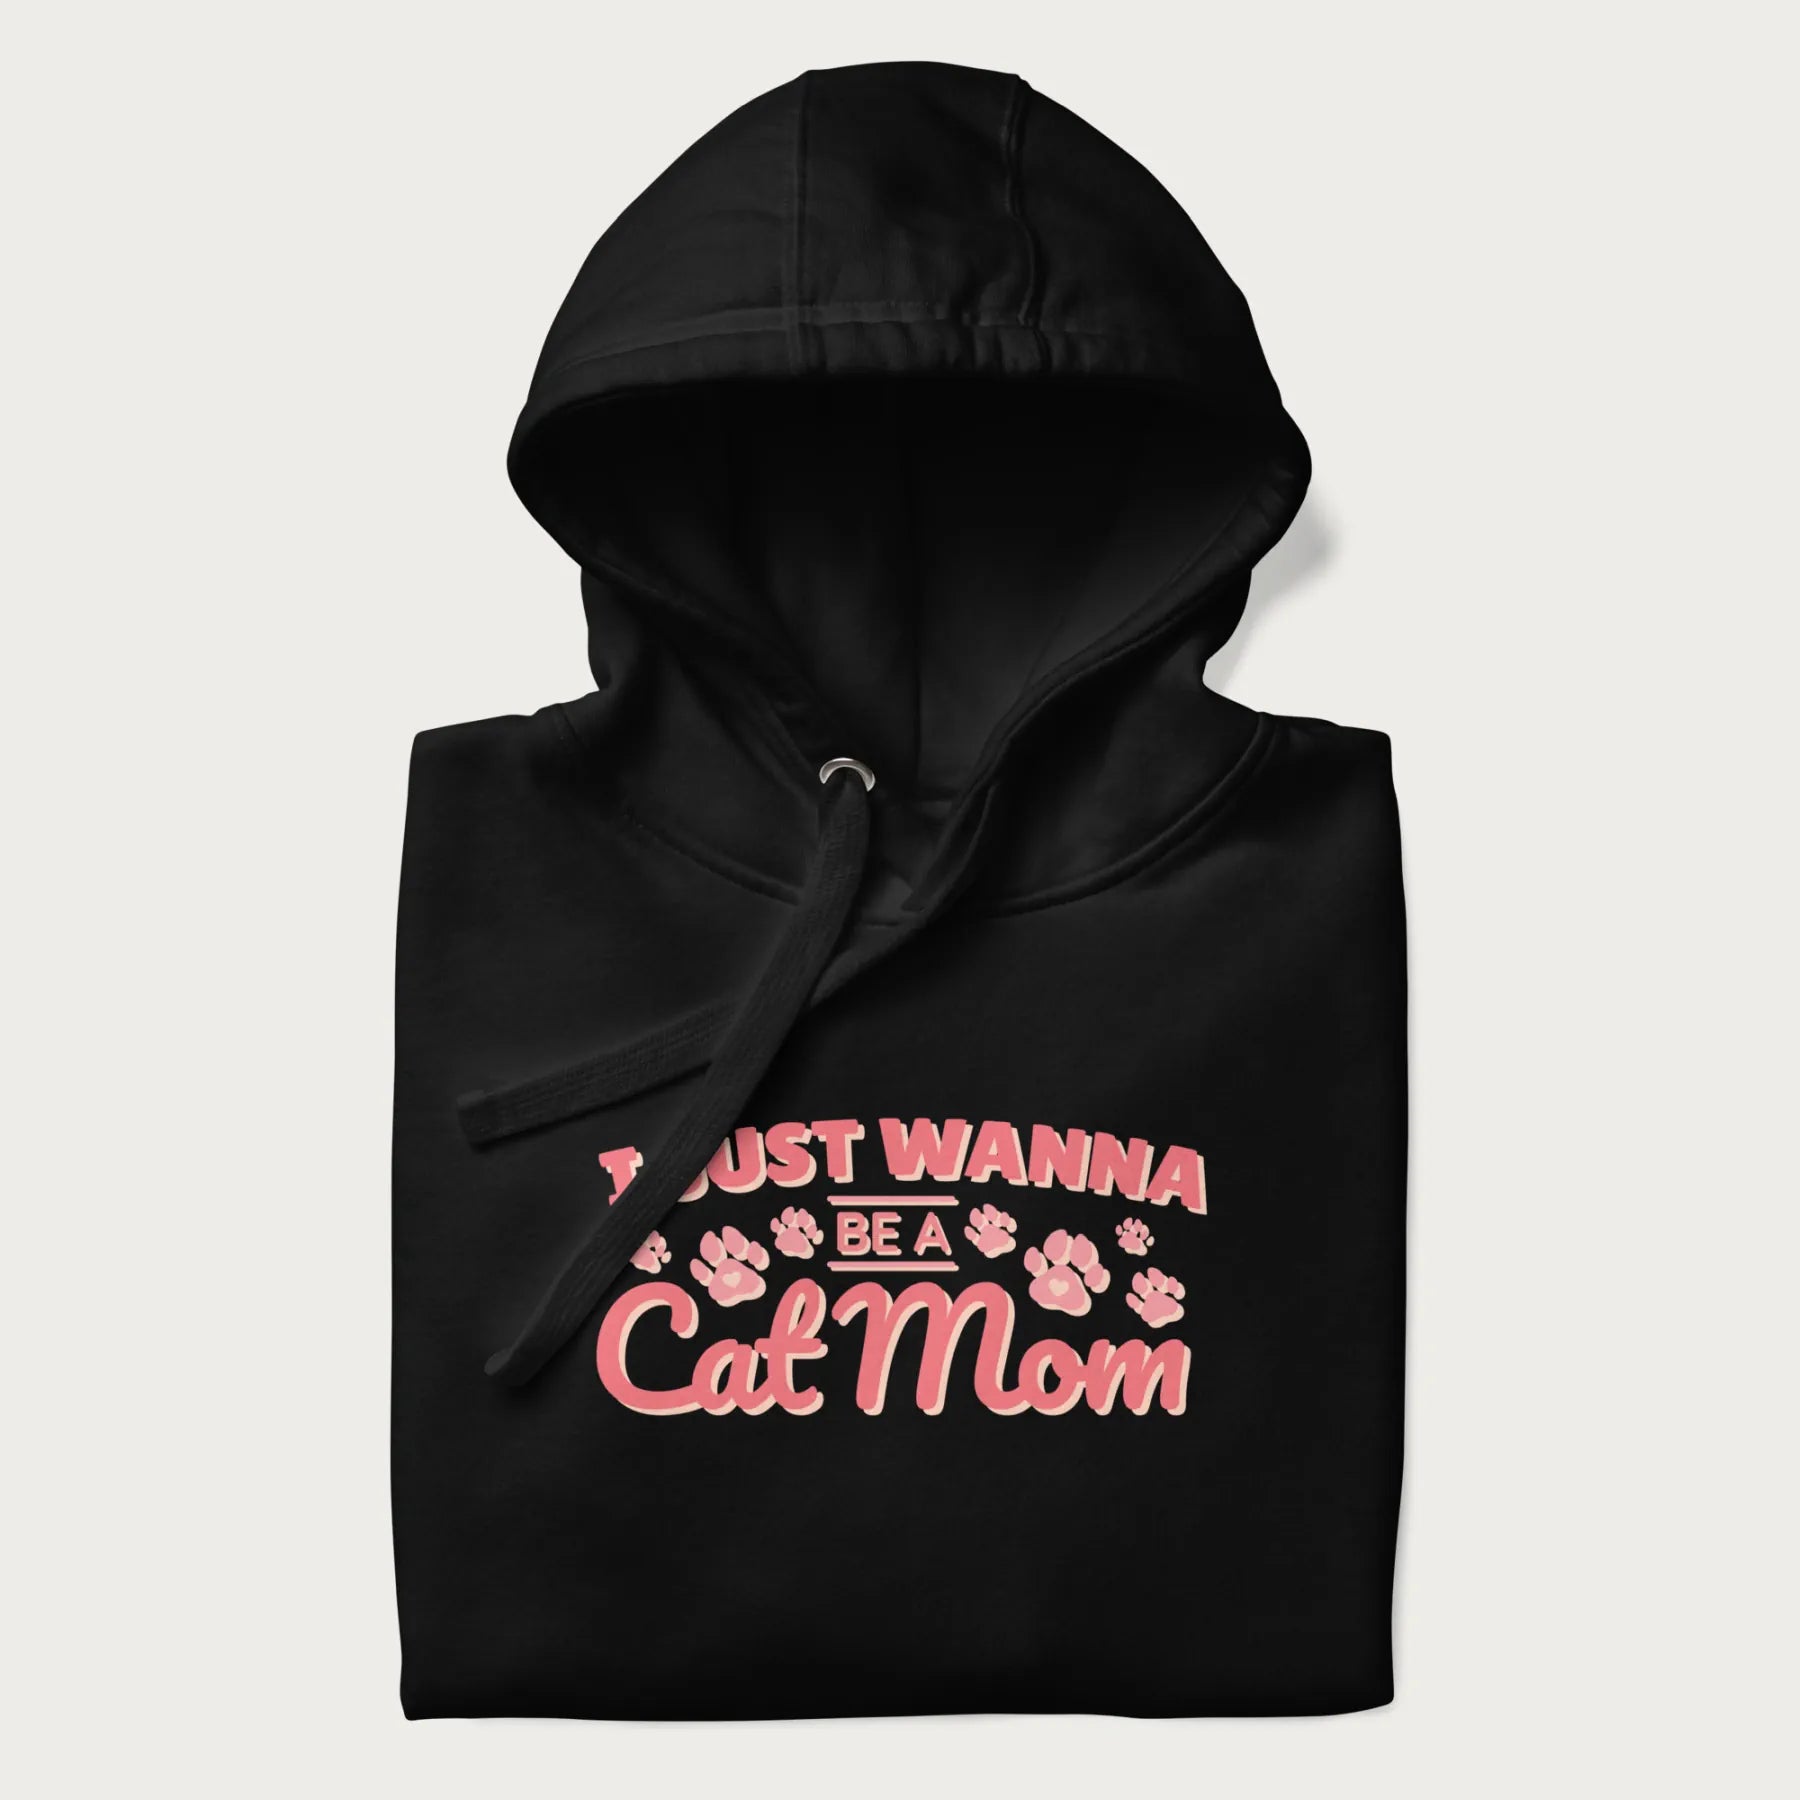 Graphic on a folded black hoodie saying 'I Just Wanna Be a Cat Mom' with pink lettering and paw prints.